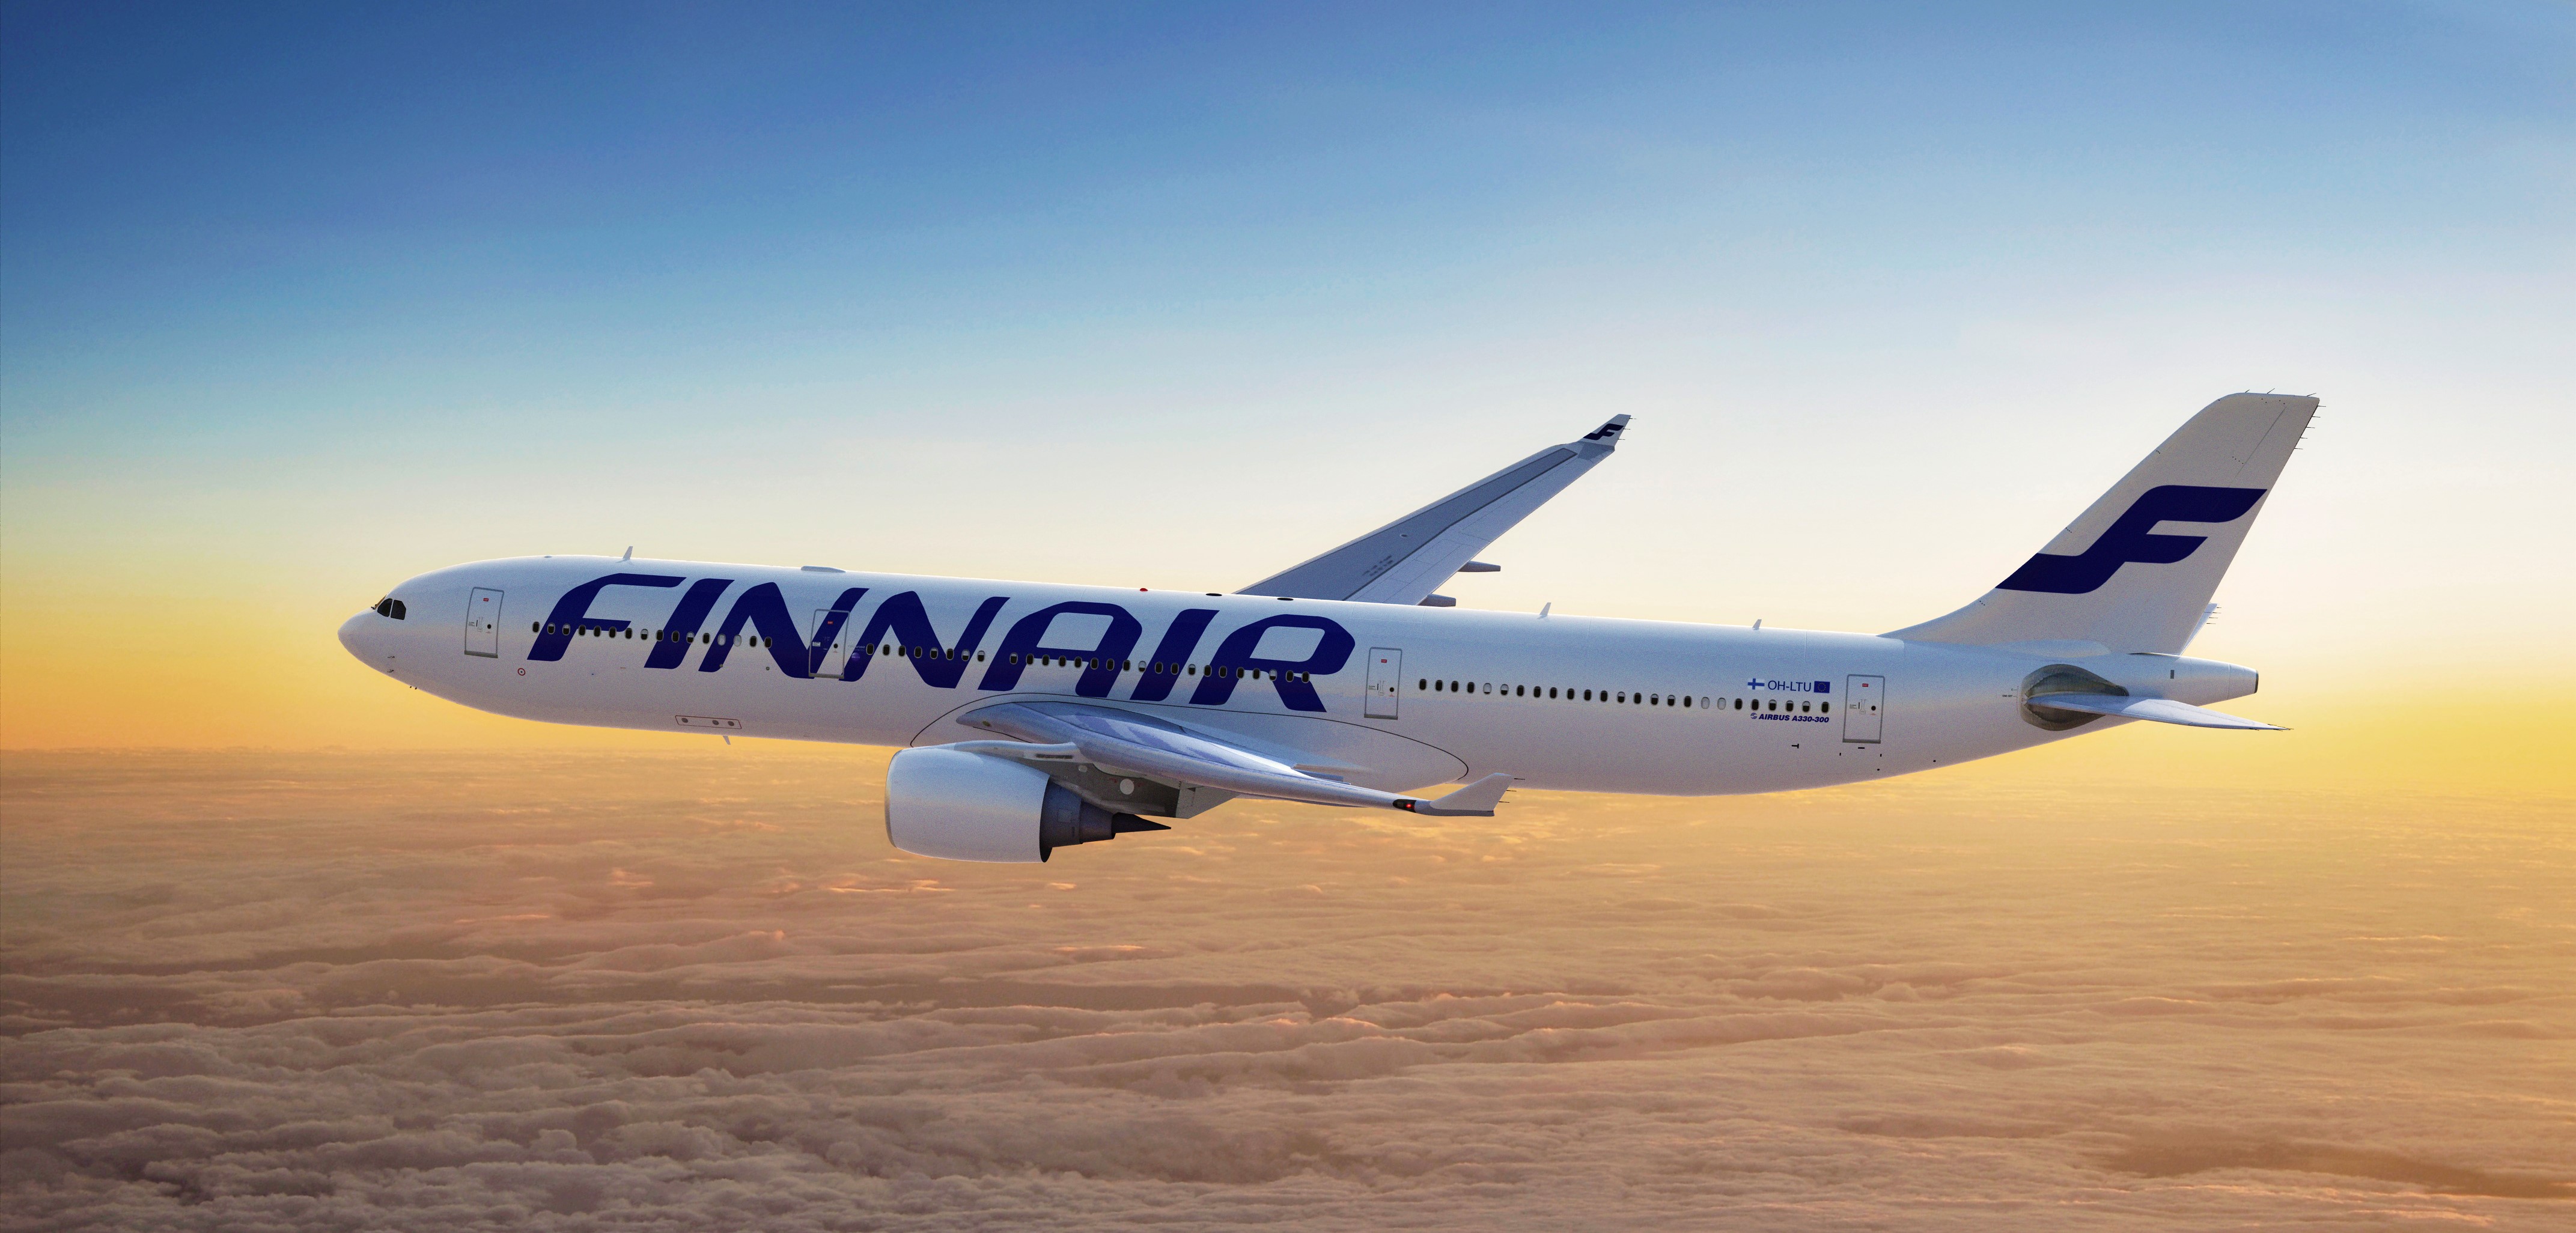 'Furloughs due to war' after 'Furloughs due to Pandemic' ! 90  to  200  Finnair  pilots  and  150  to  450 cabin crews  might  face  Furloughs , amid  Russian  airspace  Closure .